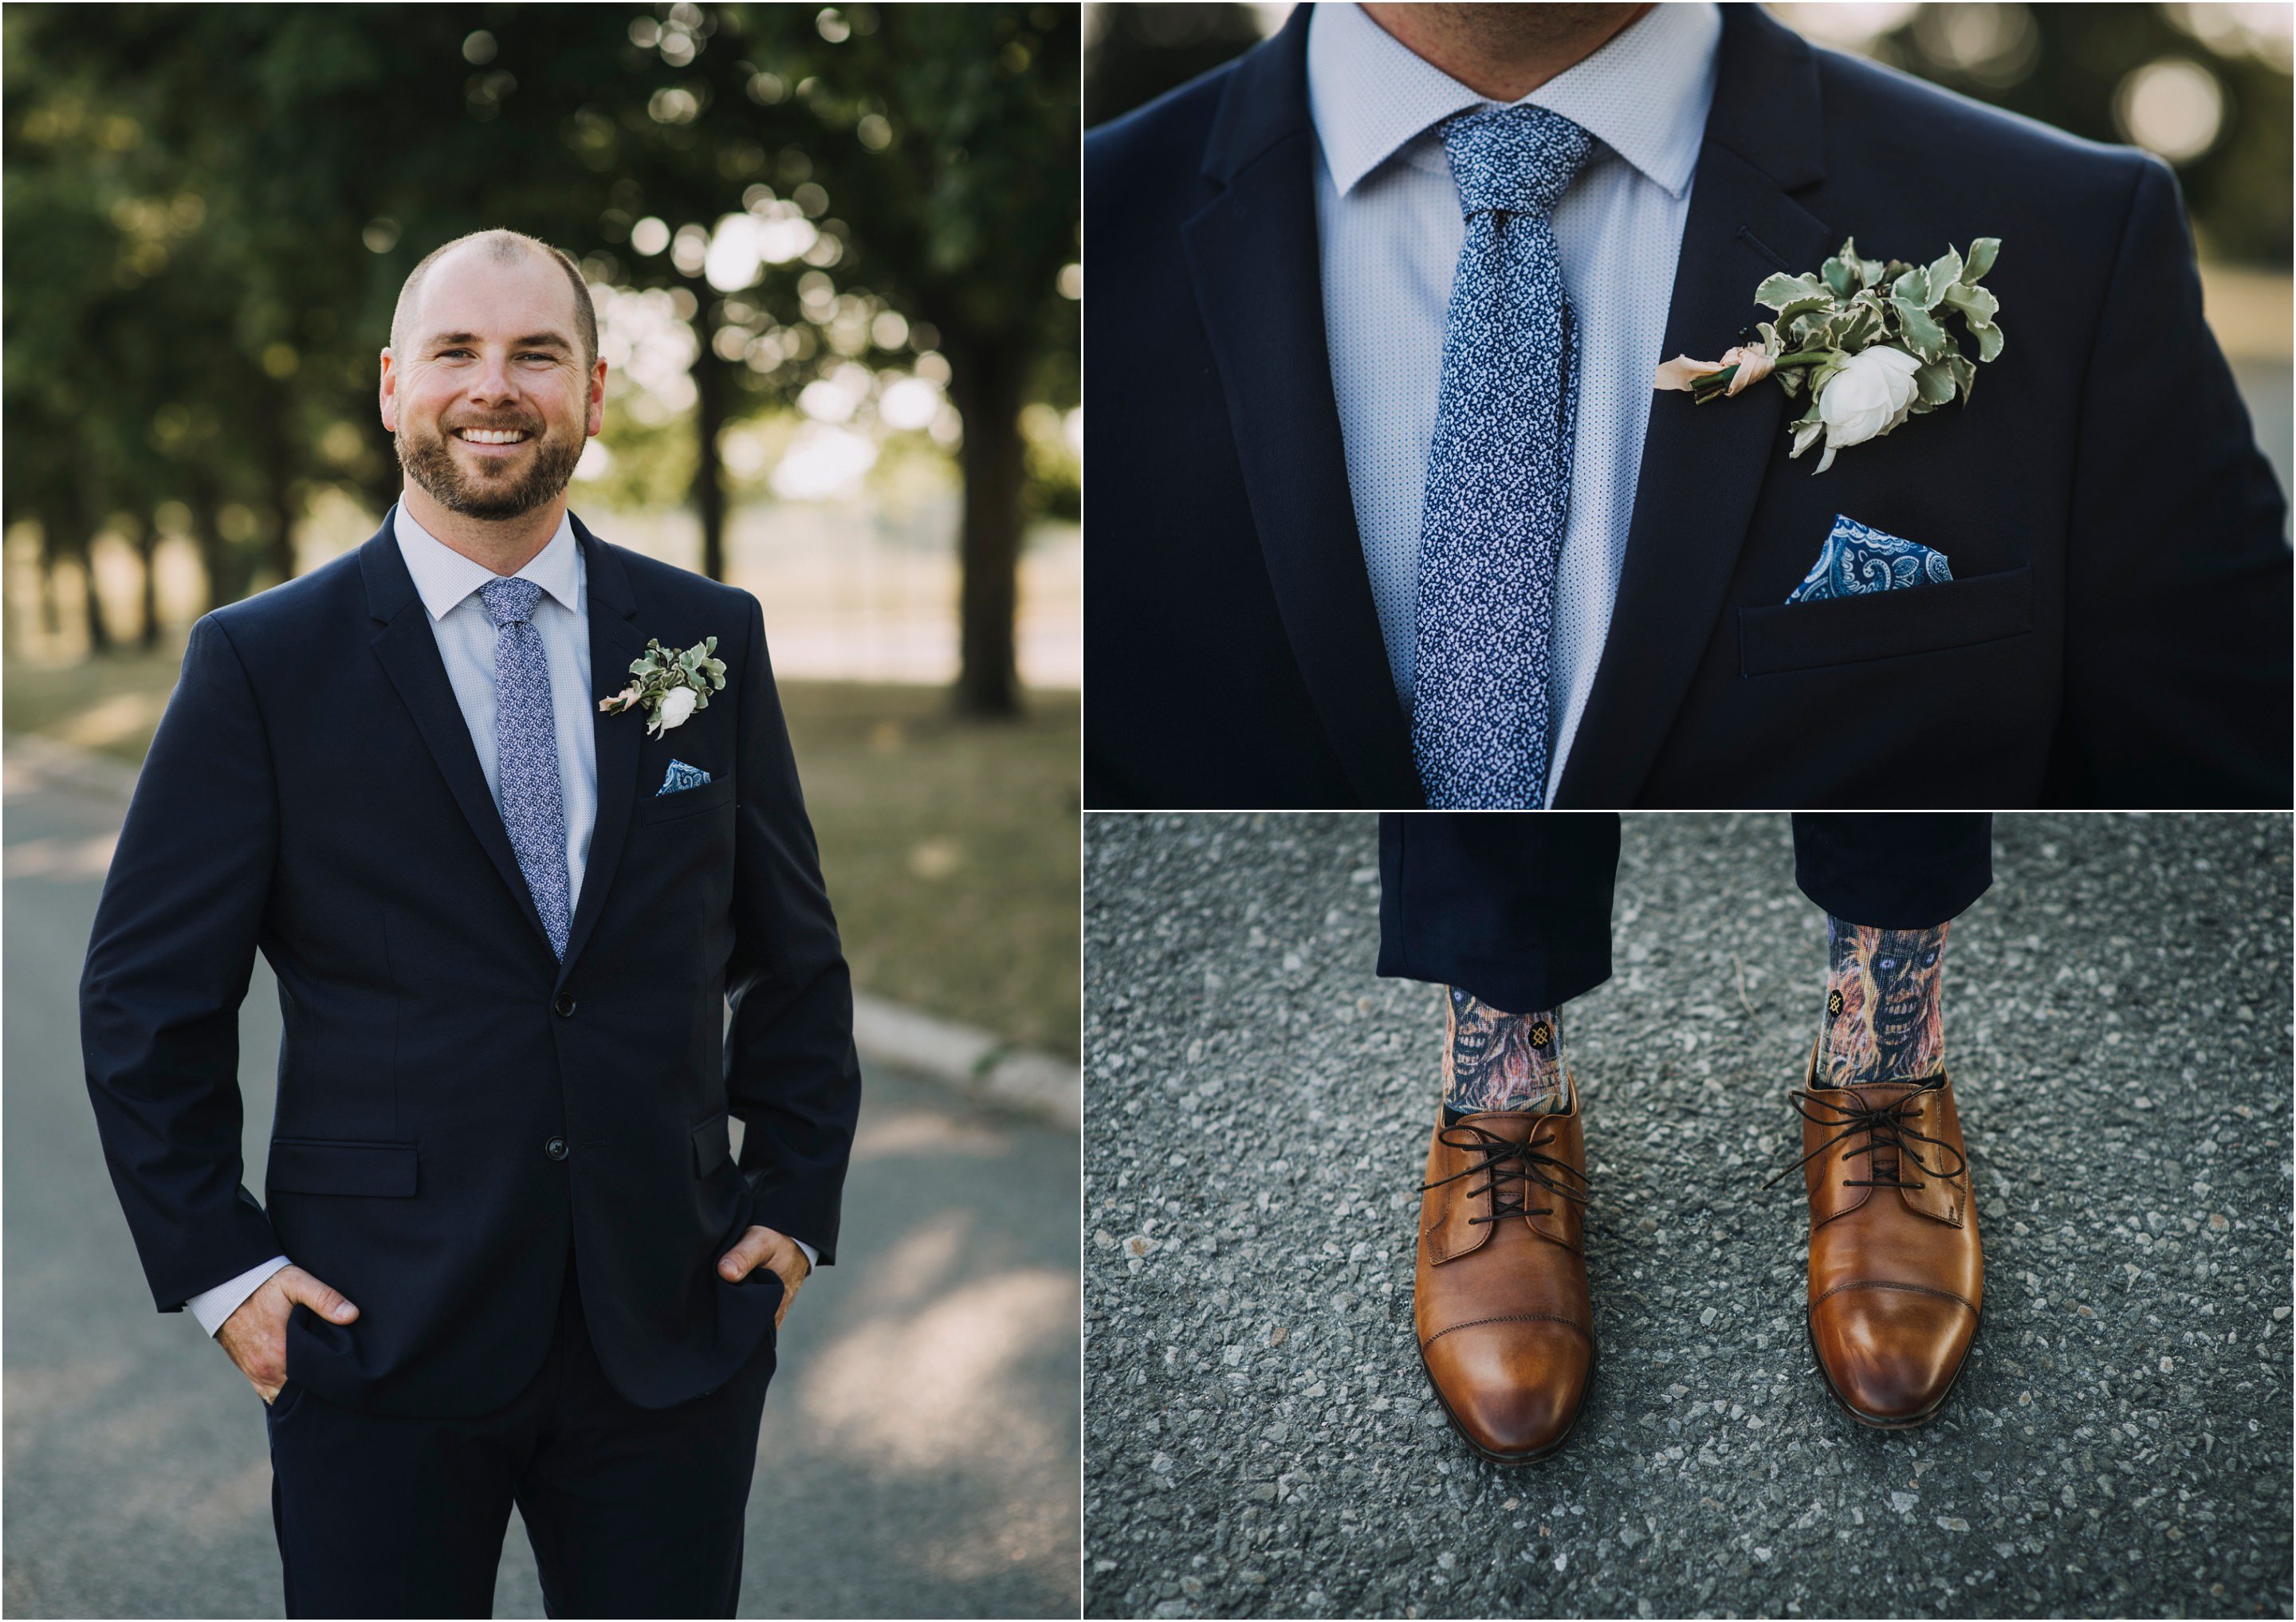 Canadian Aviation Museum Wedding - Cindy Lottes Photography